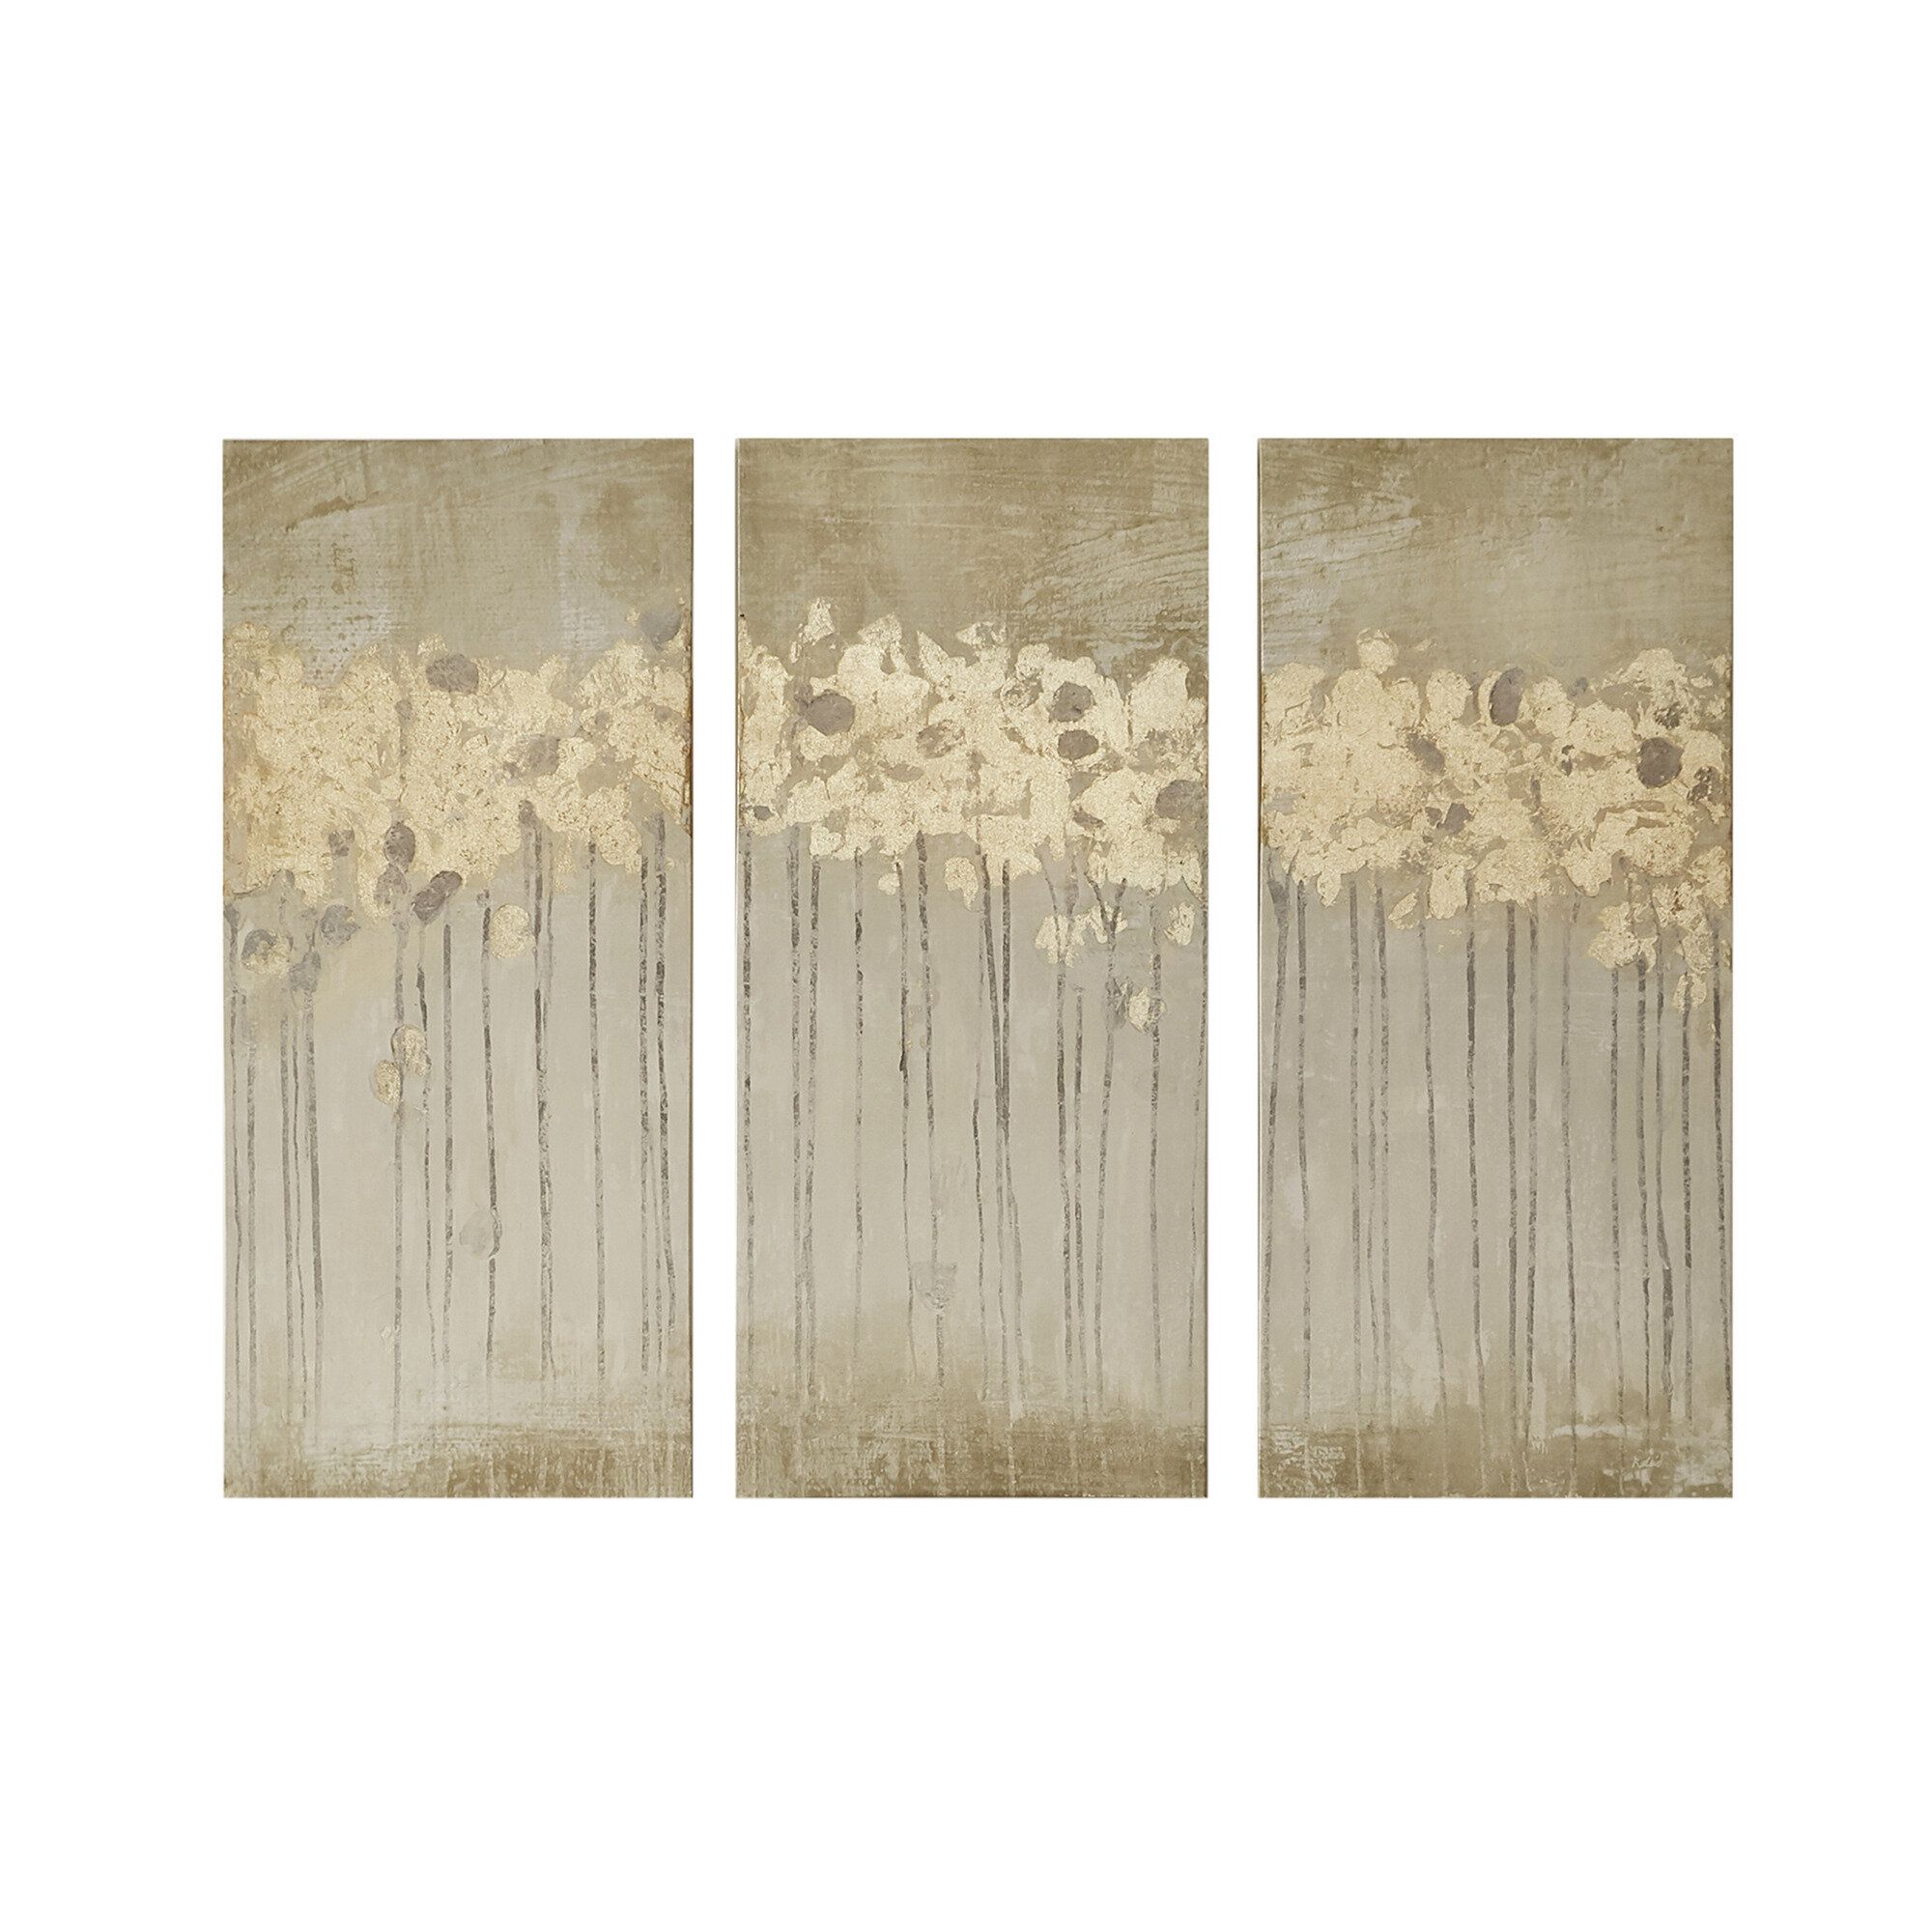 Modern Abstract Wall Art | Allmodern With 2 Piece Multiple Layer Metal Flower Wall Decor Sets (View 17 of 30)